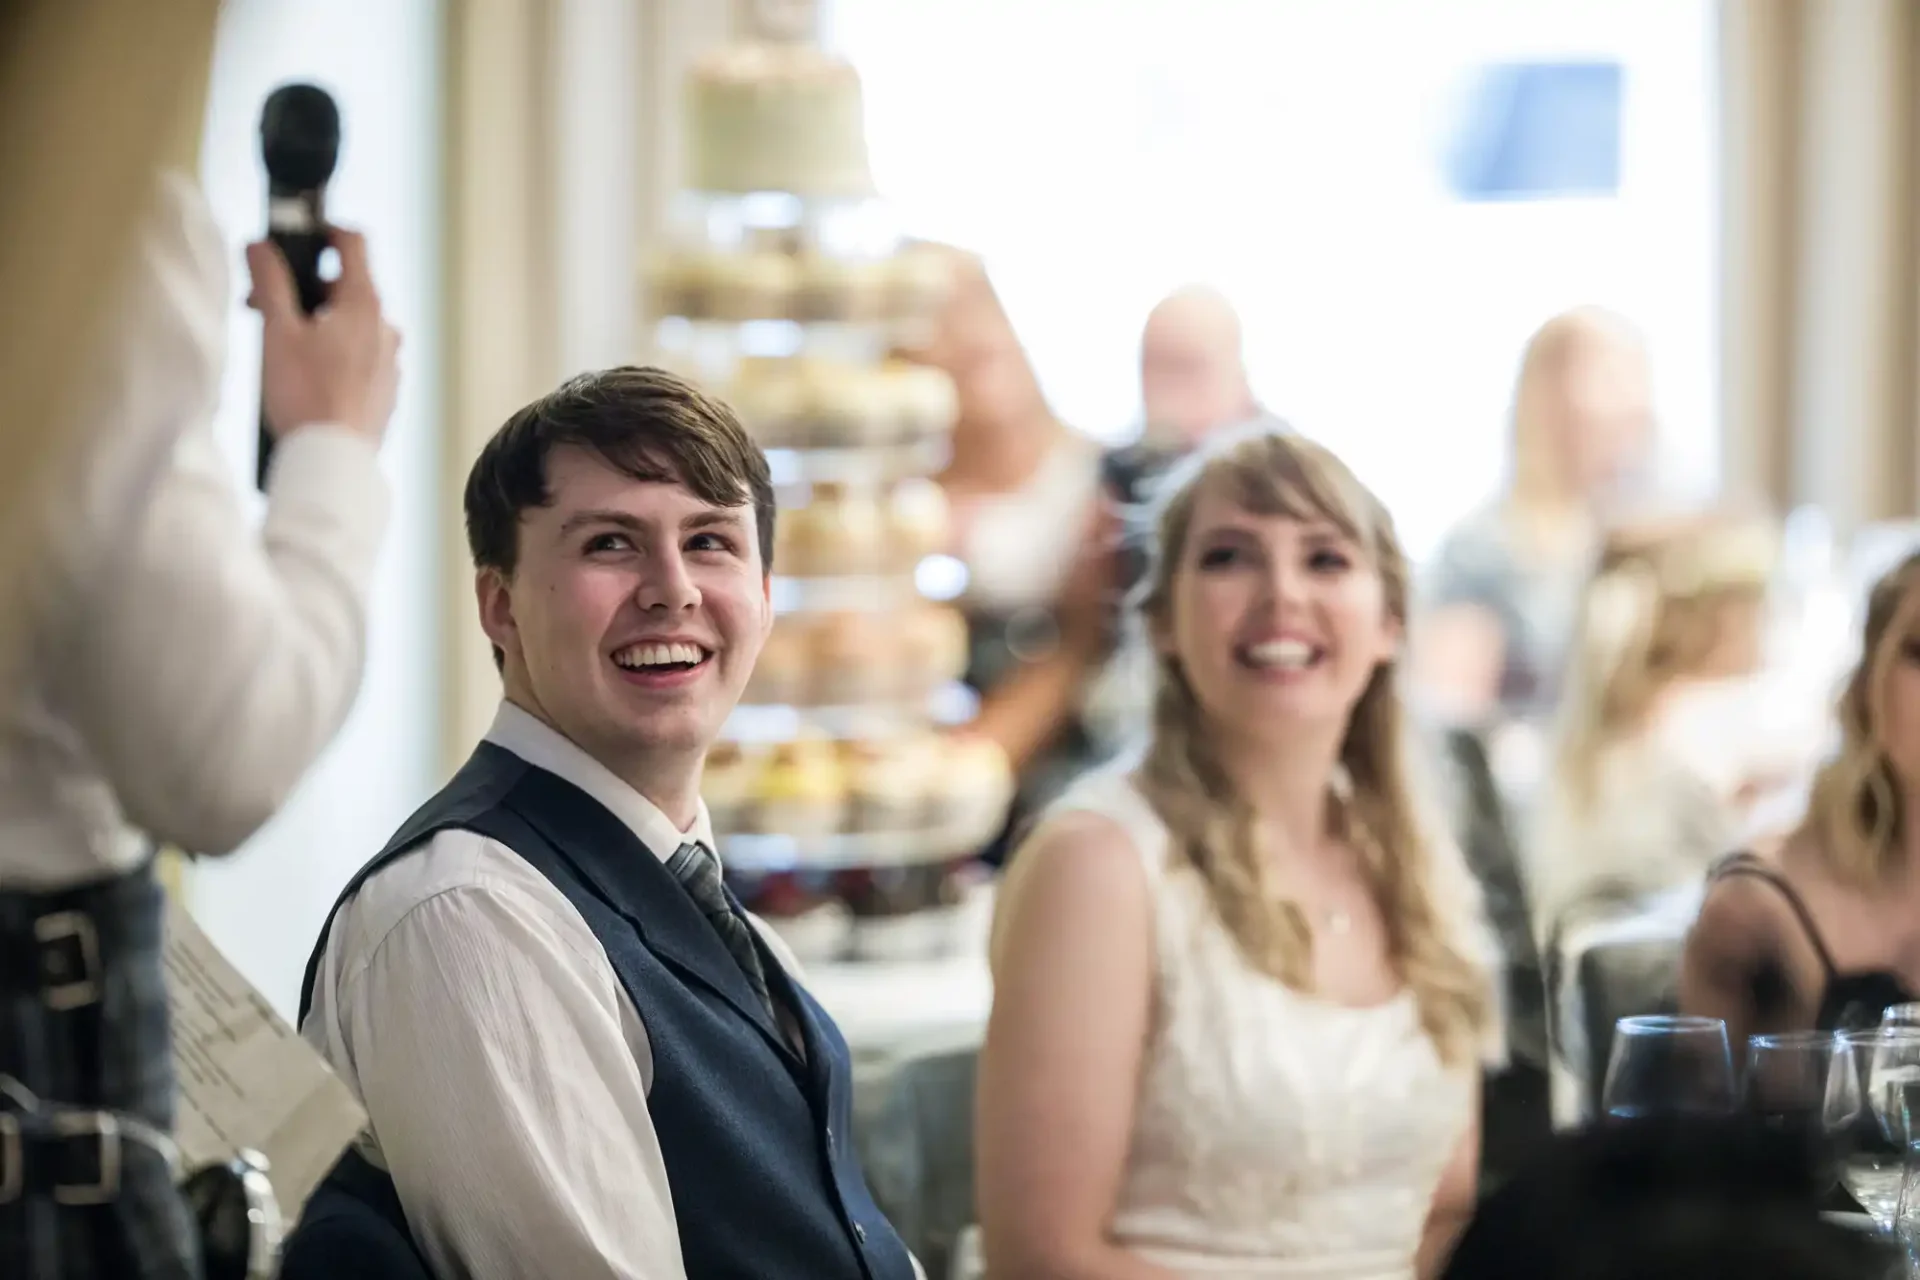 A joyful bride and groom seated at a wedding reception, smiling as a guest speaks with a microphone in the background.